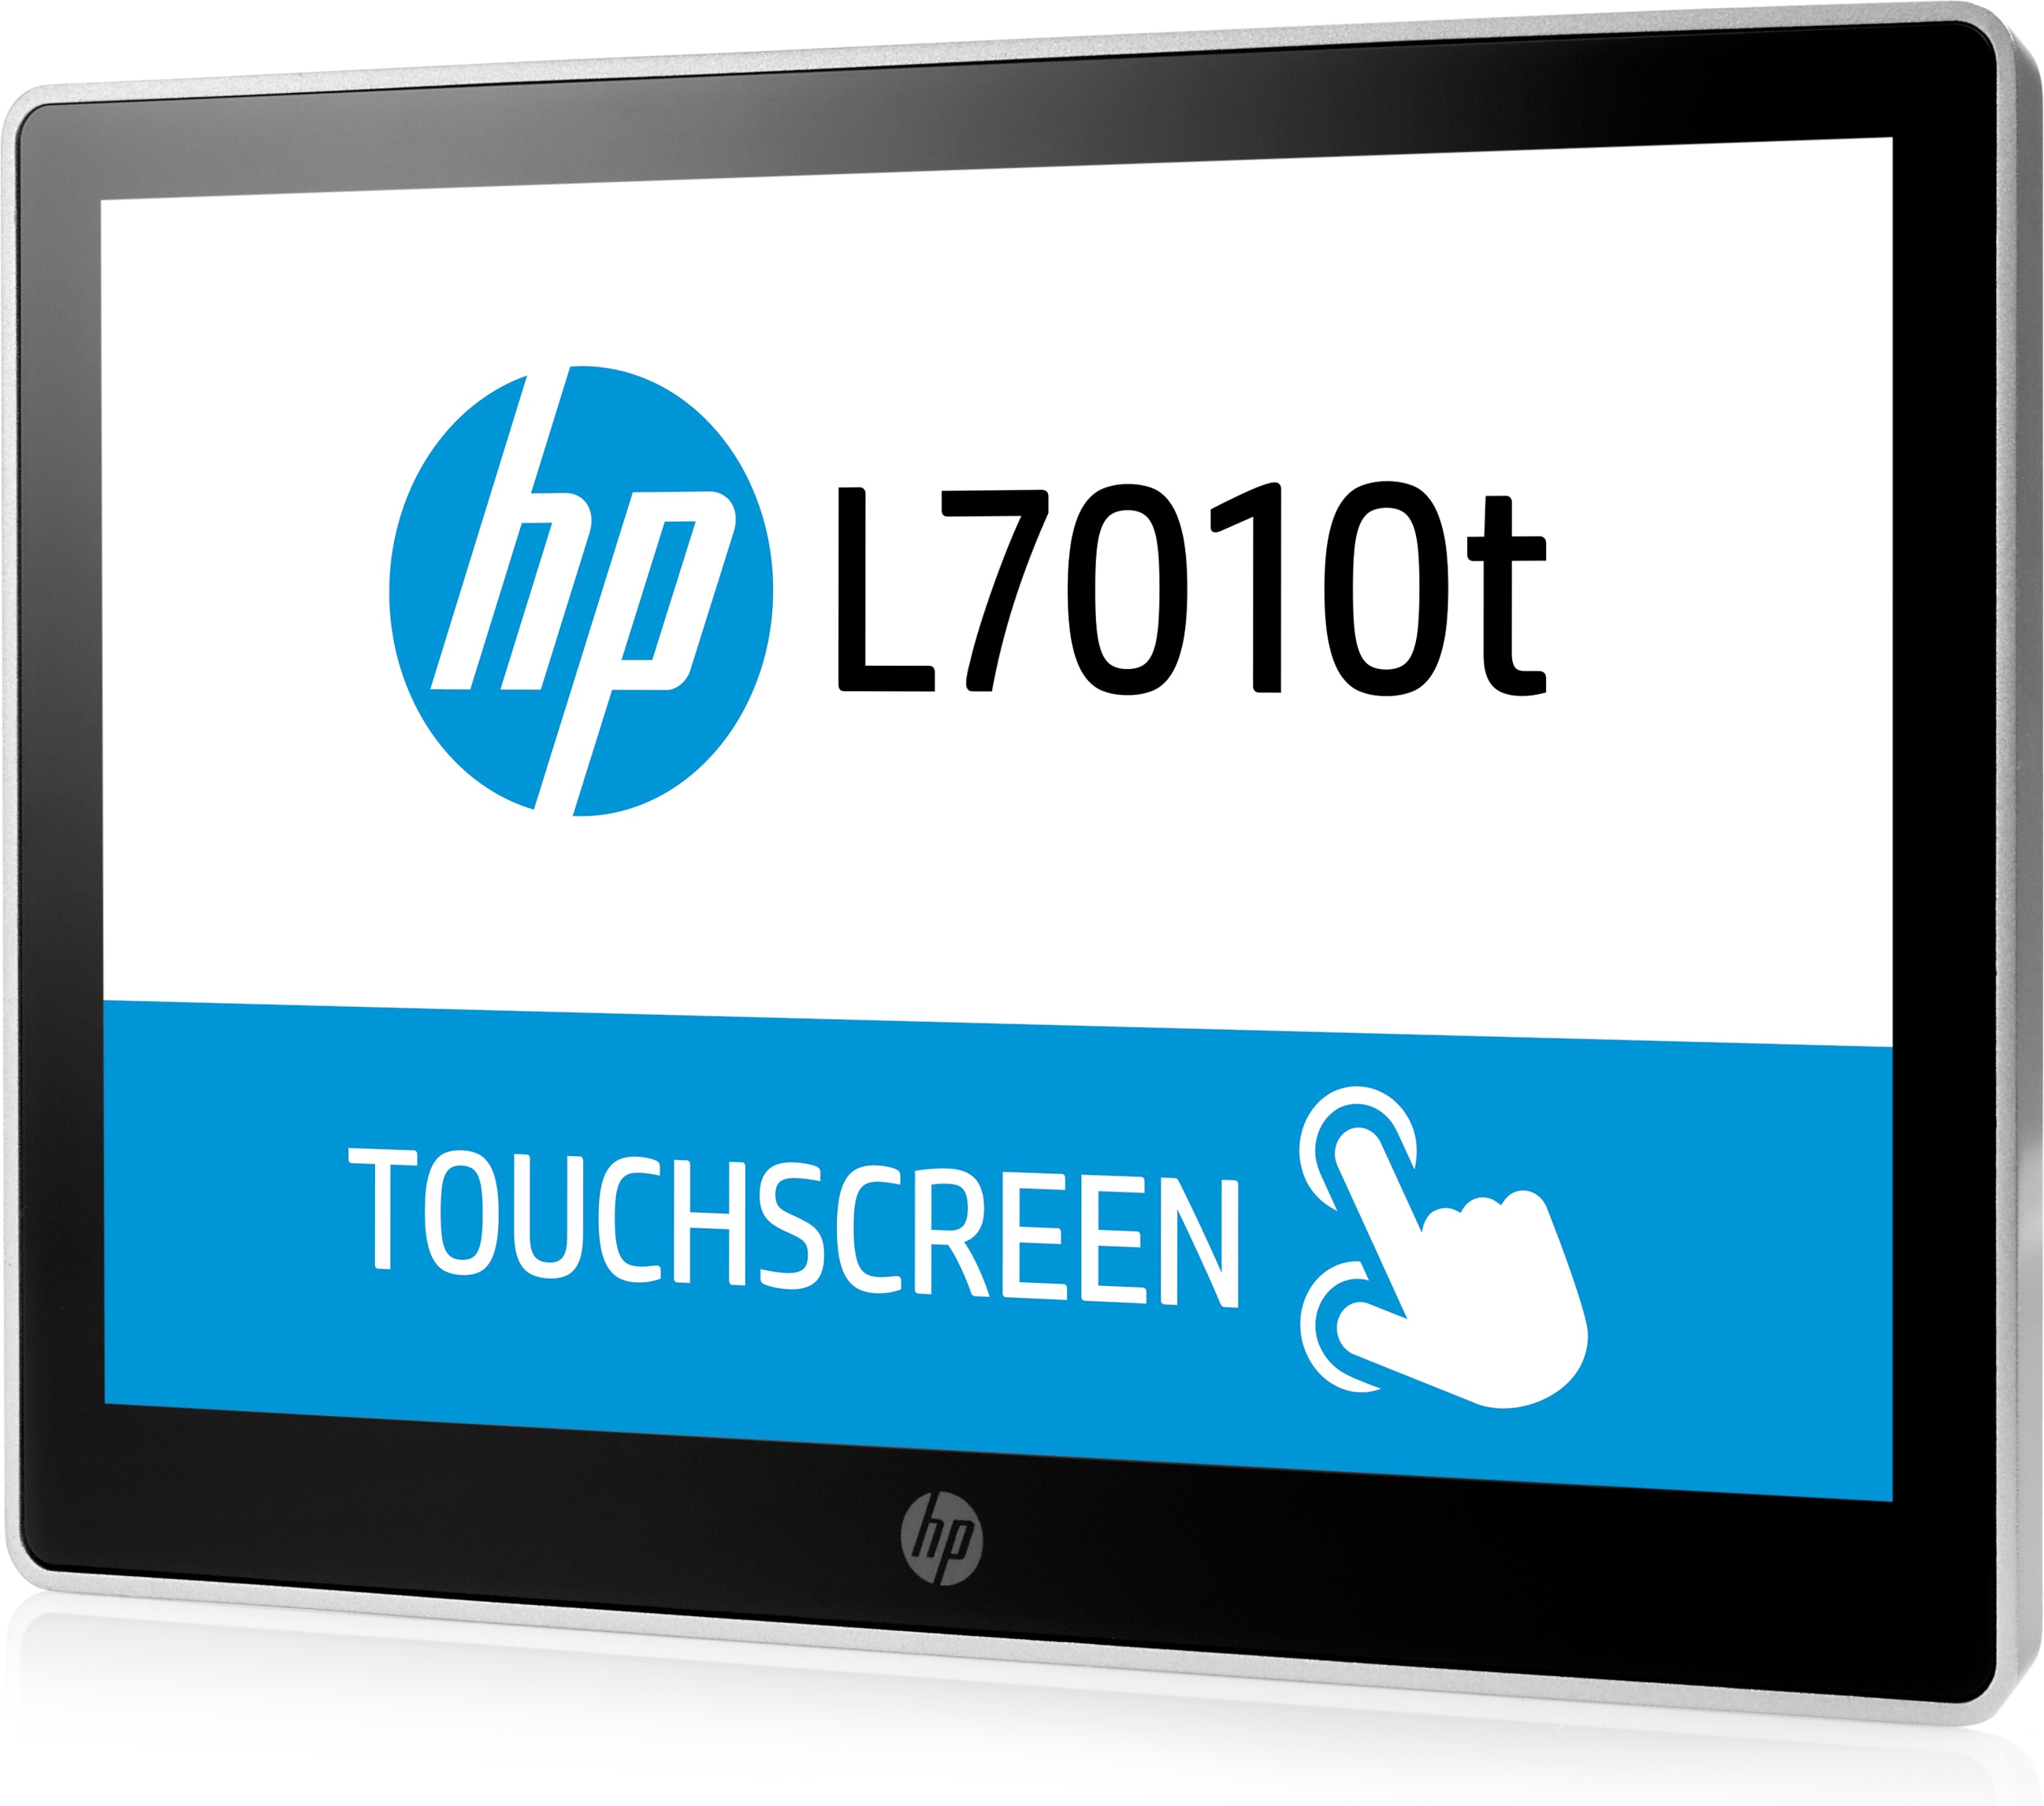 HP L7010t Retail Touch Monitor - LED-Monitor mit KVM-Switch - 25.7 cm (10.1")